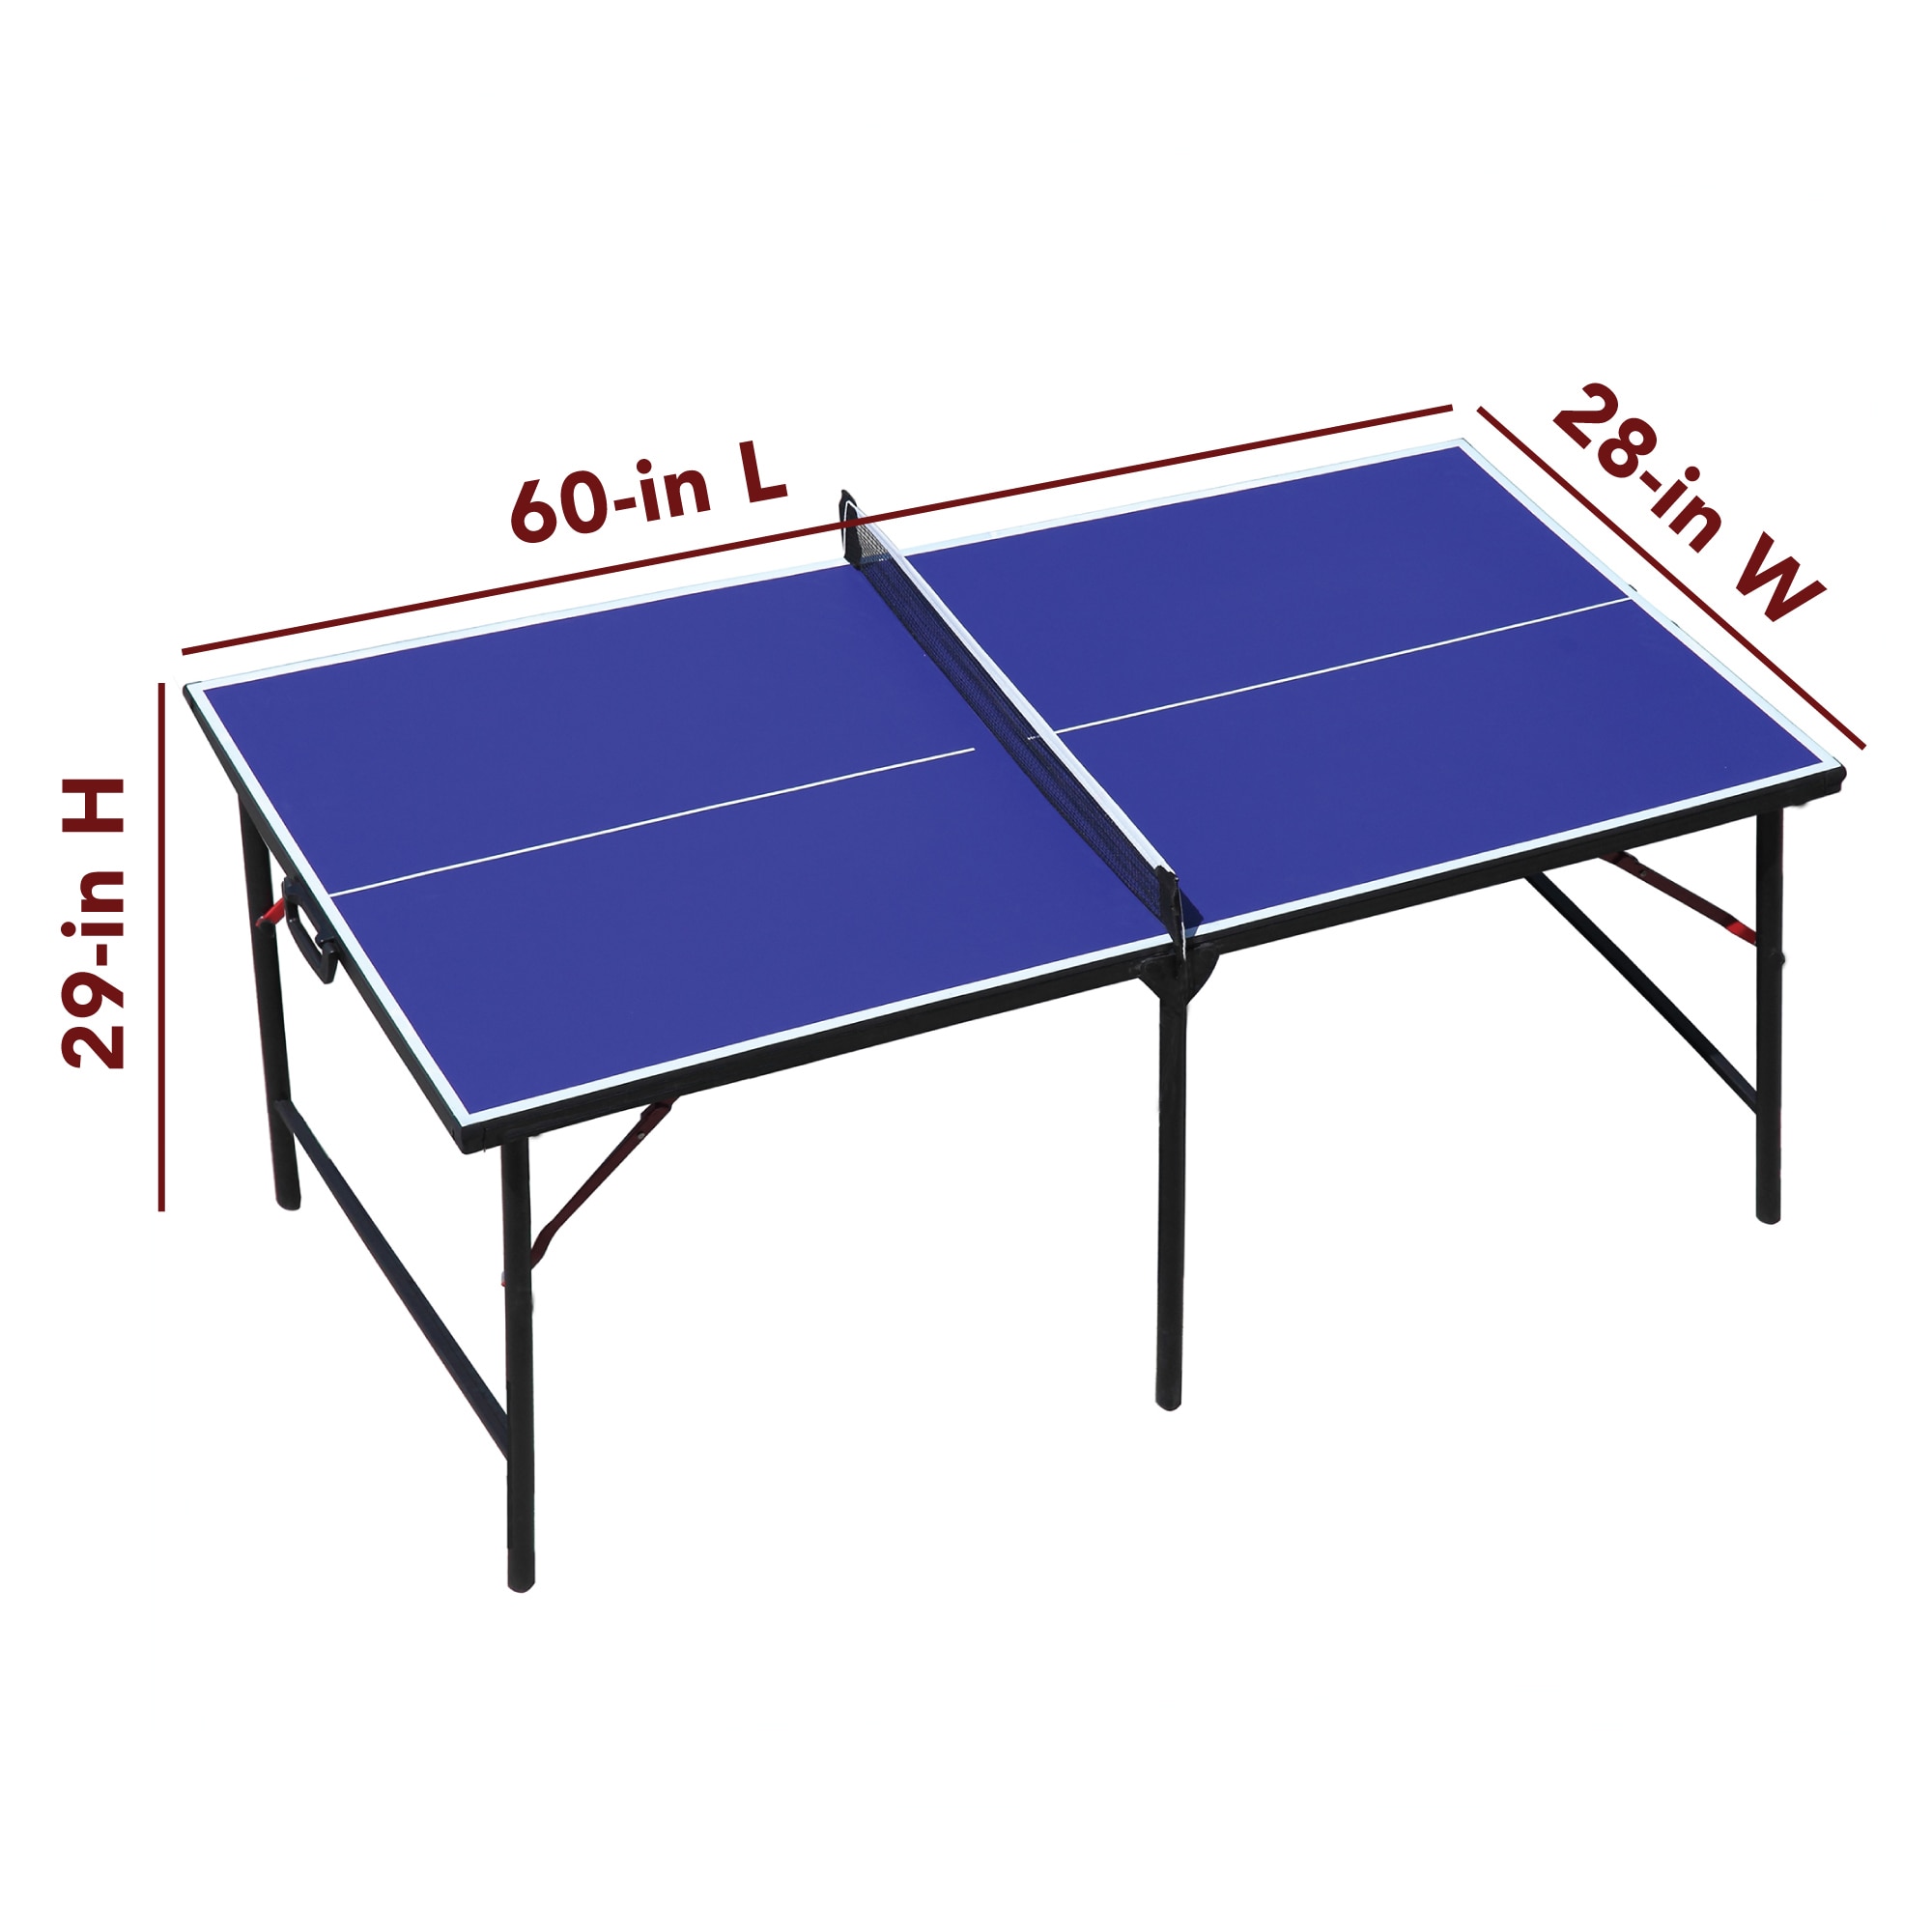 Crossover Ping Pong Tables at Lowes